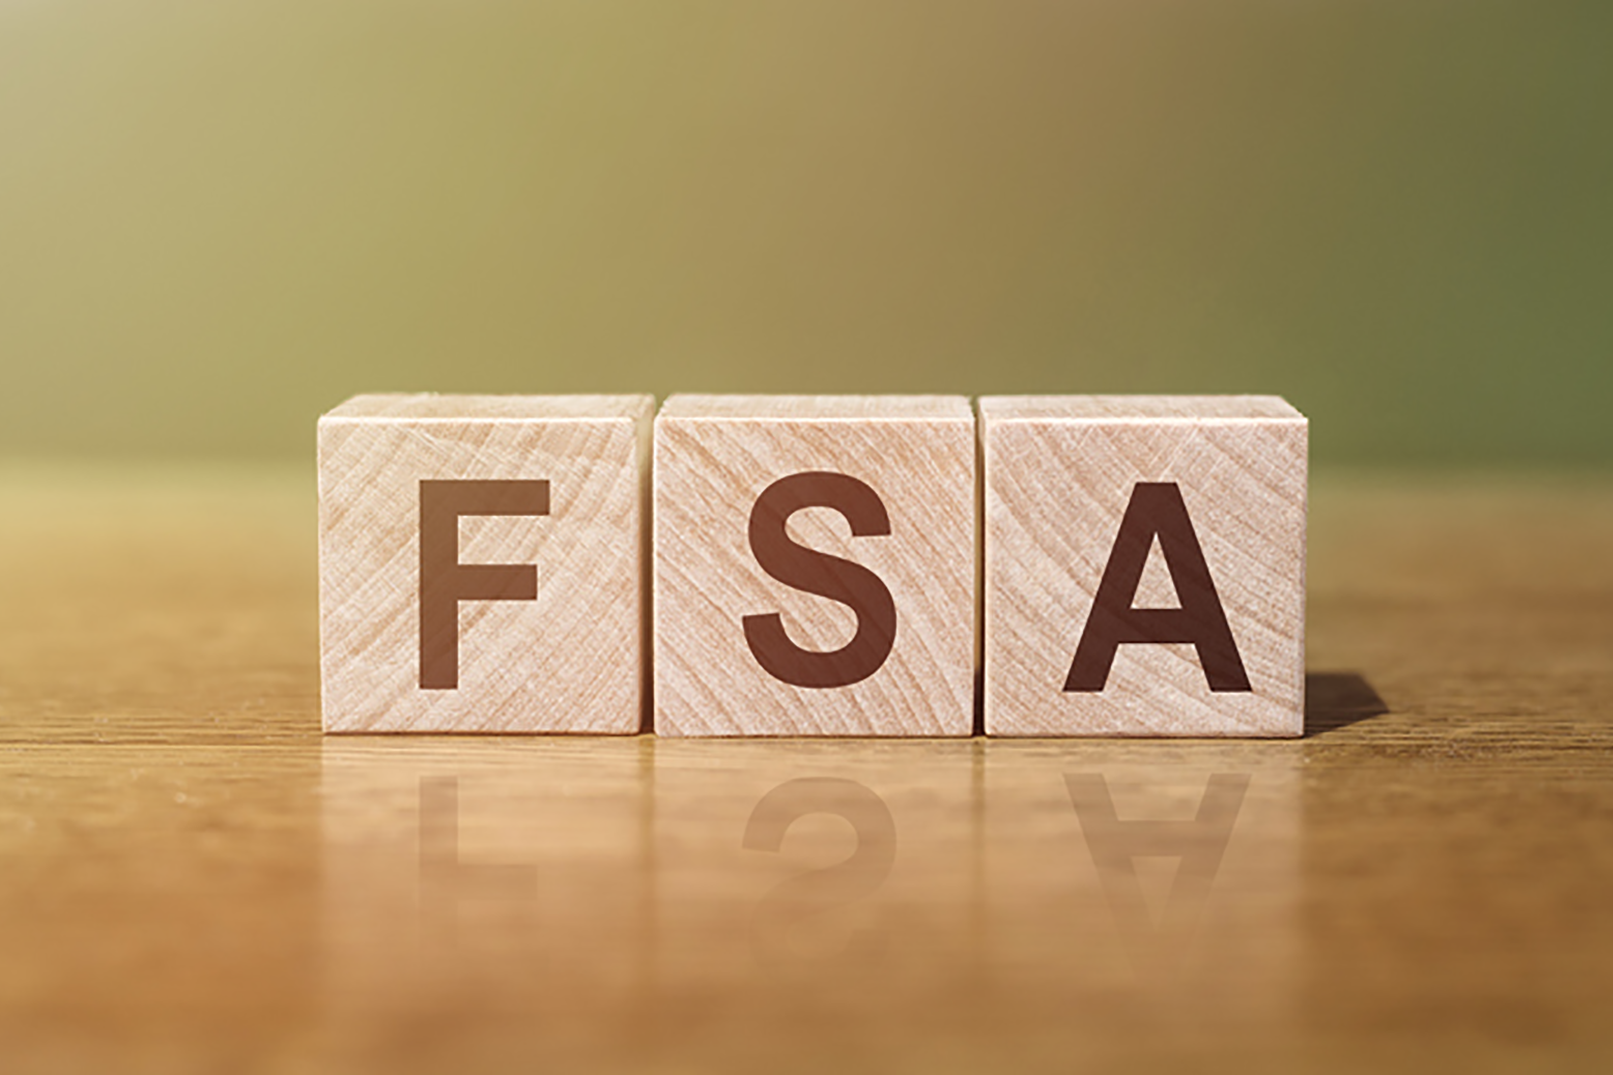 10 Things to Buy With Your FSA Money in March 2023